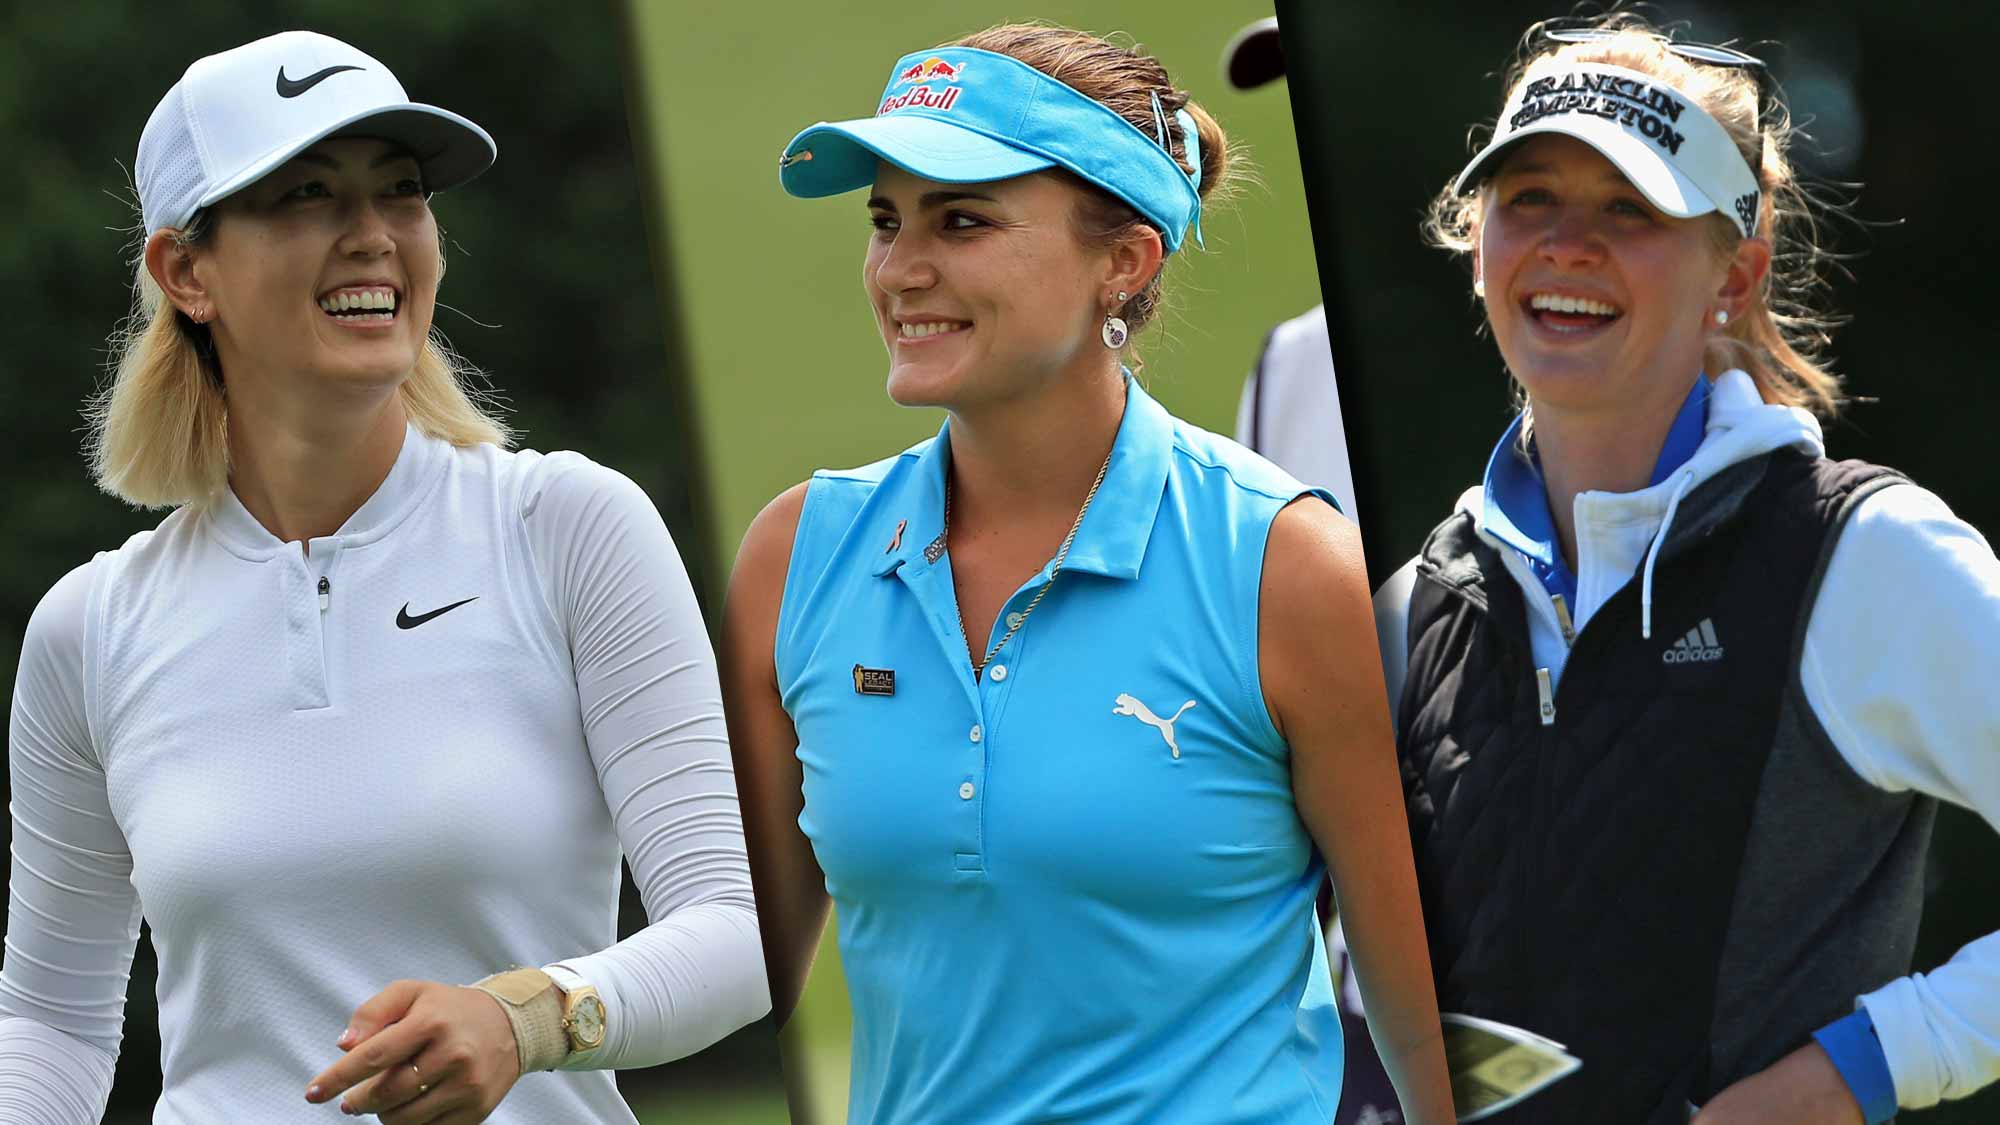 Groups & Tee Times Opening Rounds at the U.S. Women's Open conducted